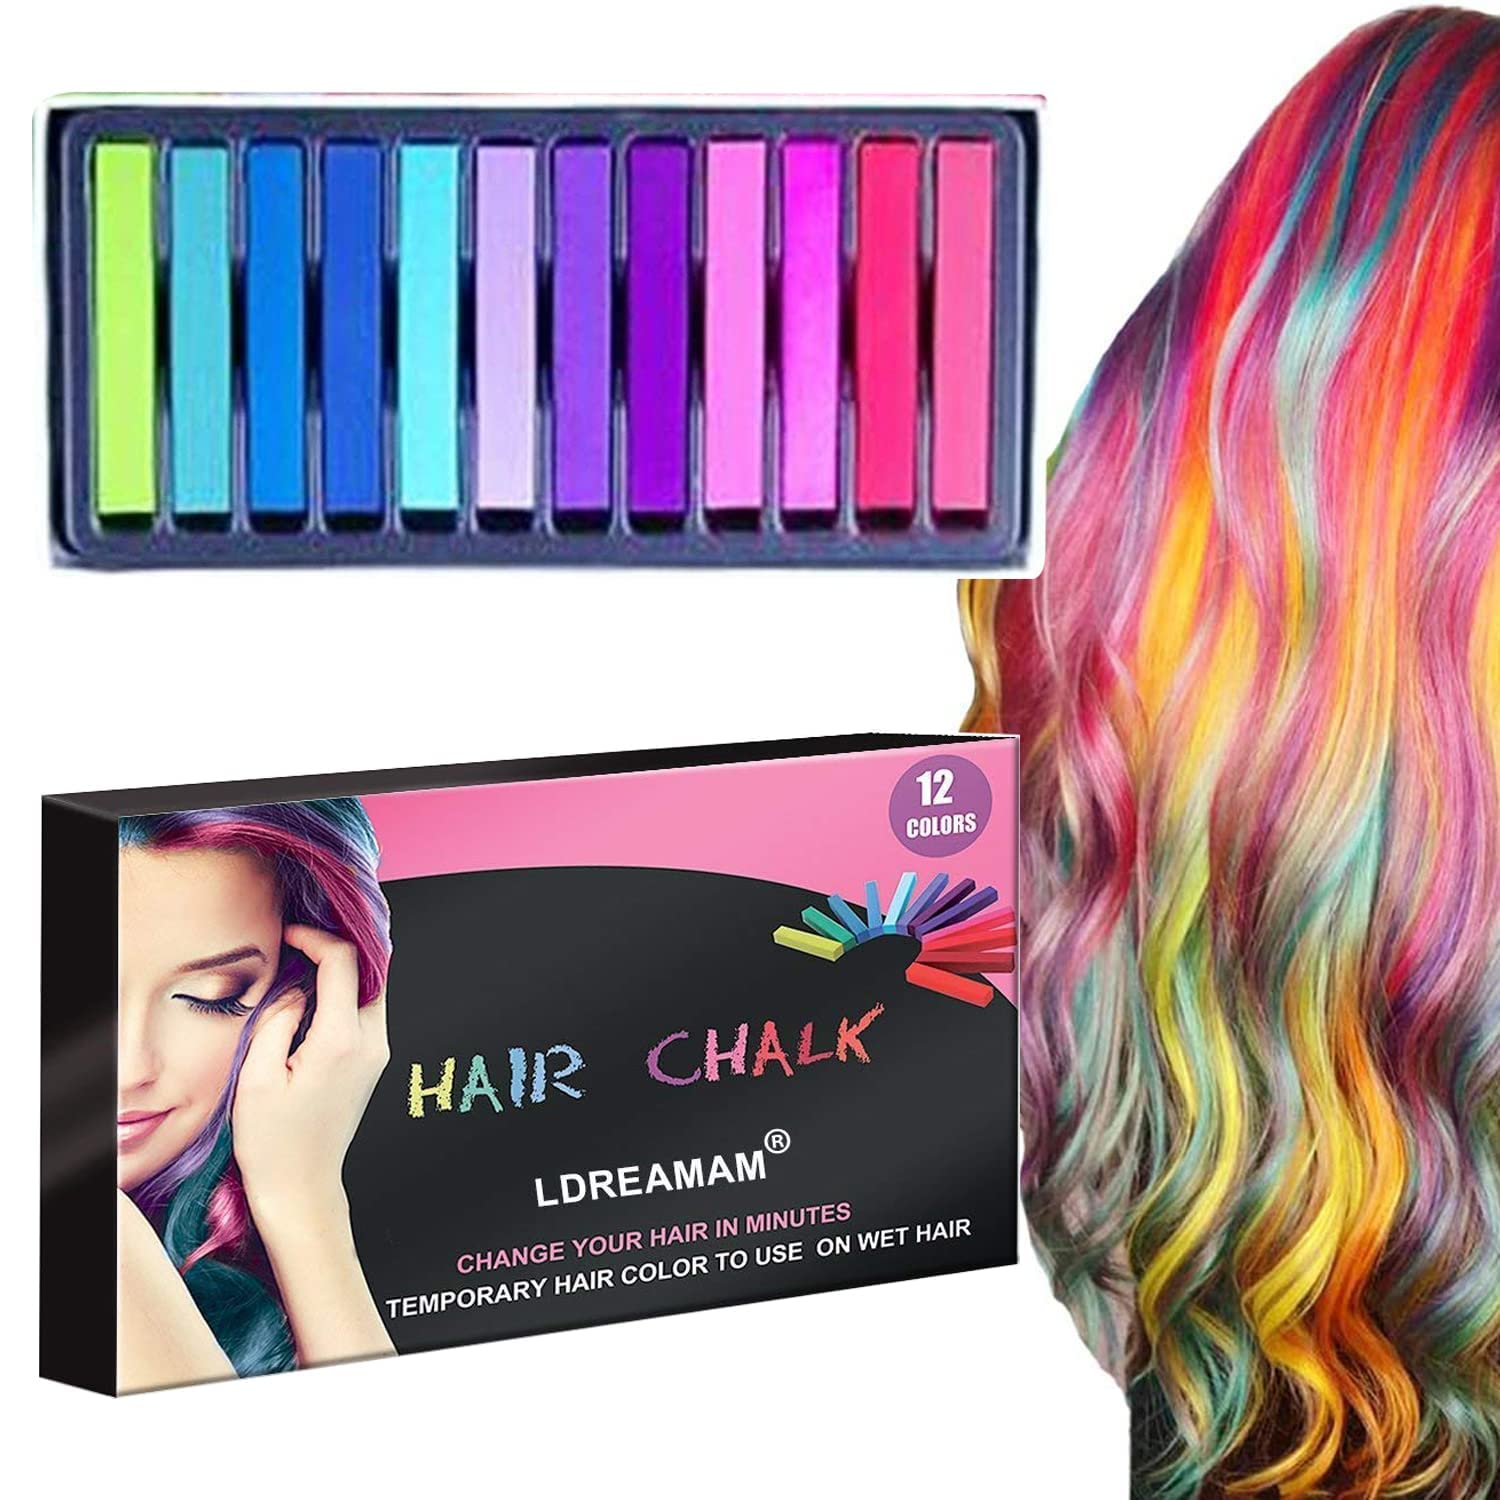 Hair Chalk,12 Color Hair Chalk Paint,Hair Chalk Set,Temporary Washable Hair  Color Dye for Kids,Non-Stick & Vibrant,New Year Birthday Party Cosplay DIY  Children's Day,Halloween,Christmas 8 colors